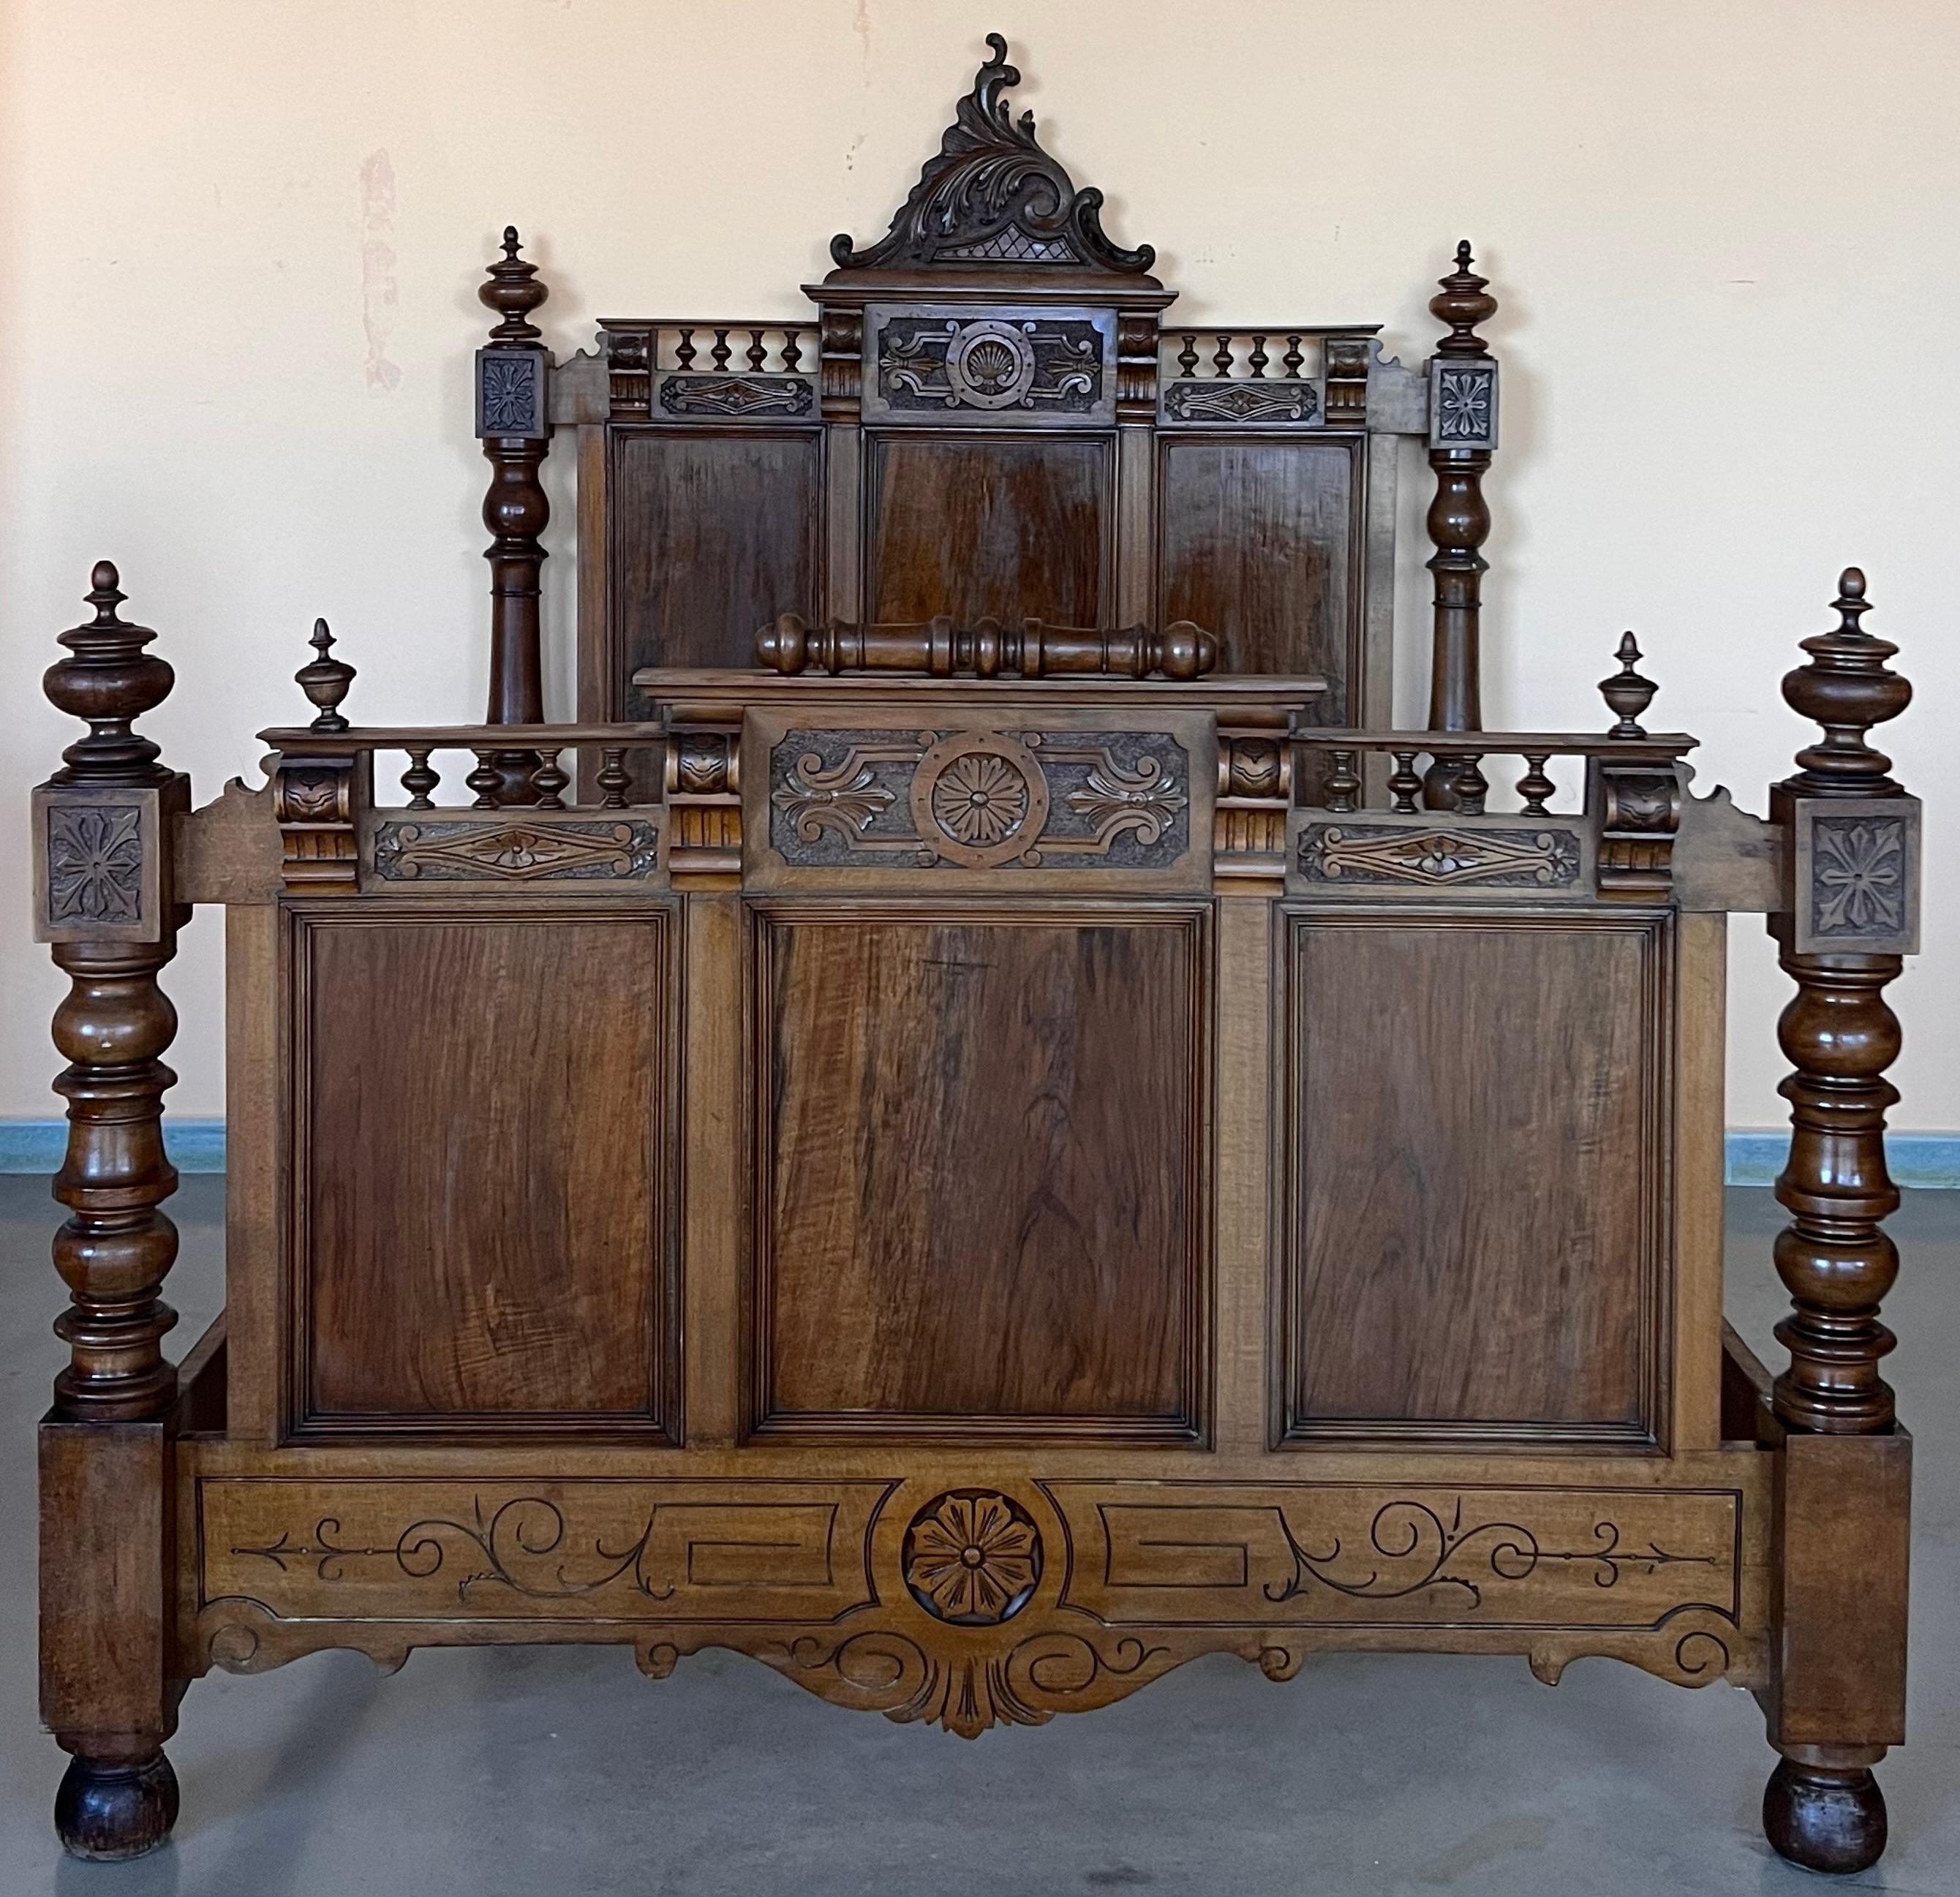 An Exquisite antique French Louis XVI full size bed. Made of Rosewood featuring foliate carved ribbon and crest with center cartouche, acorn form finials, fluted and turned columns, and carved sunflower medallion embellishments.